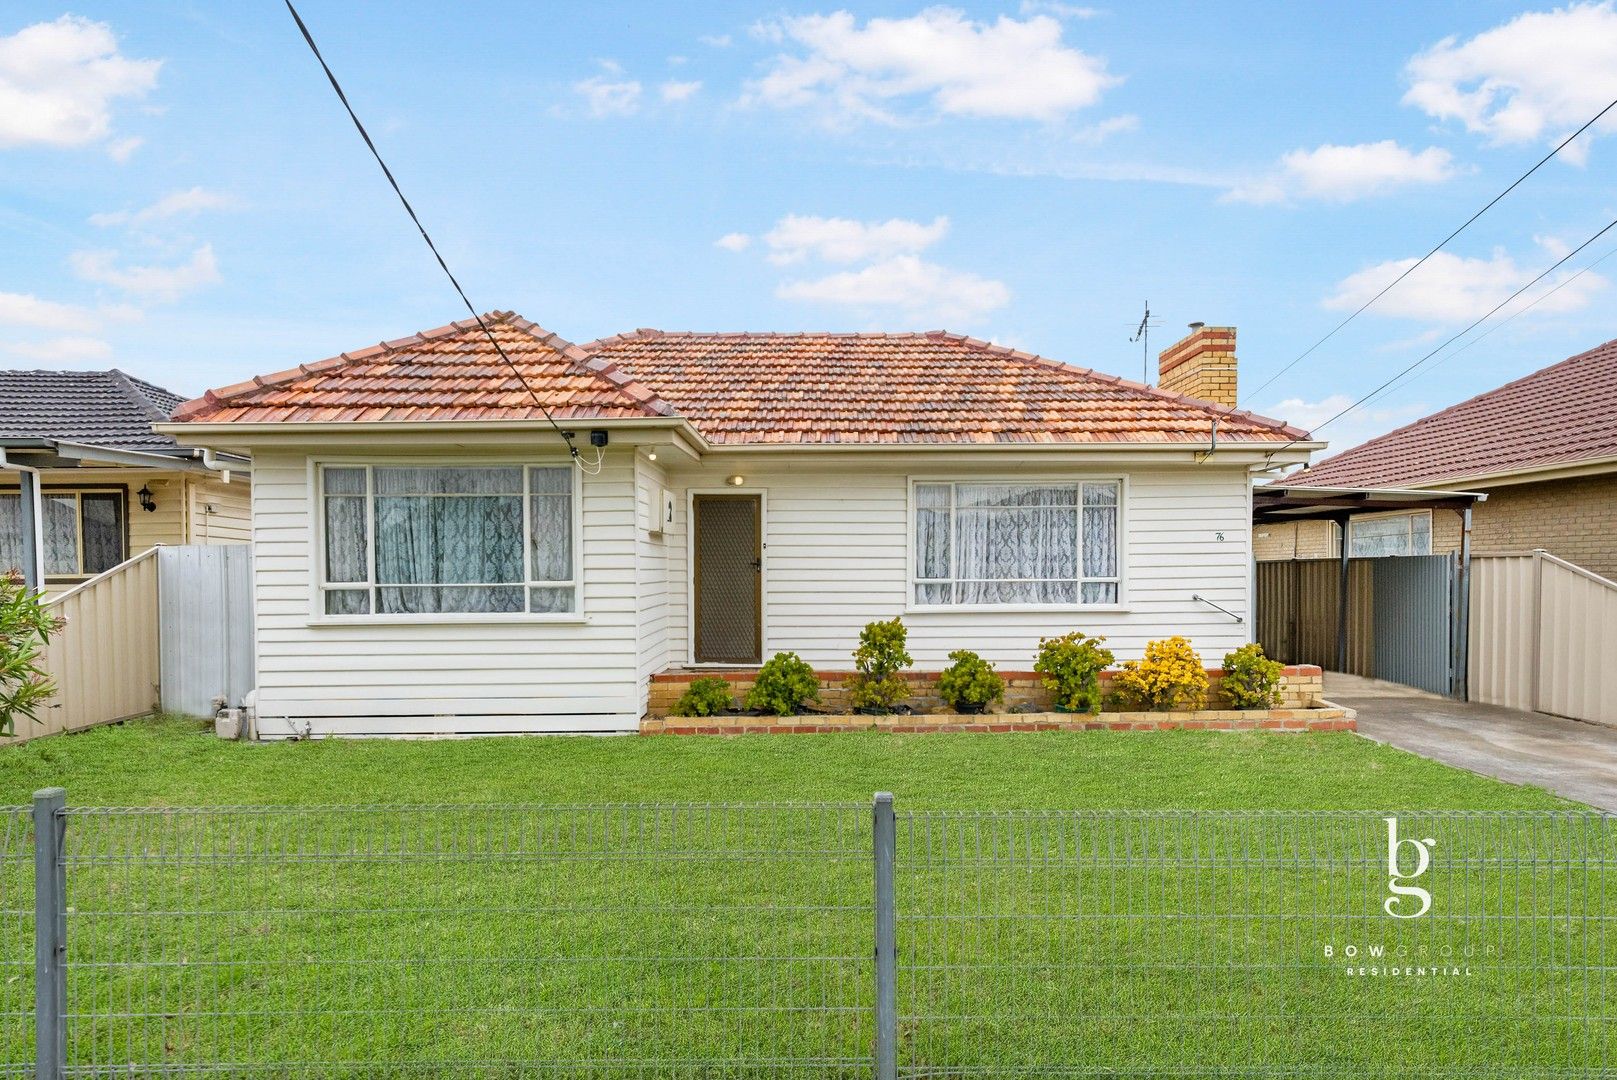 76 View Street, St Albans VIC 3021, Image 0